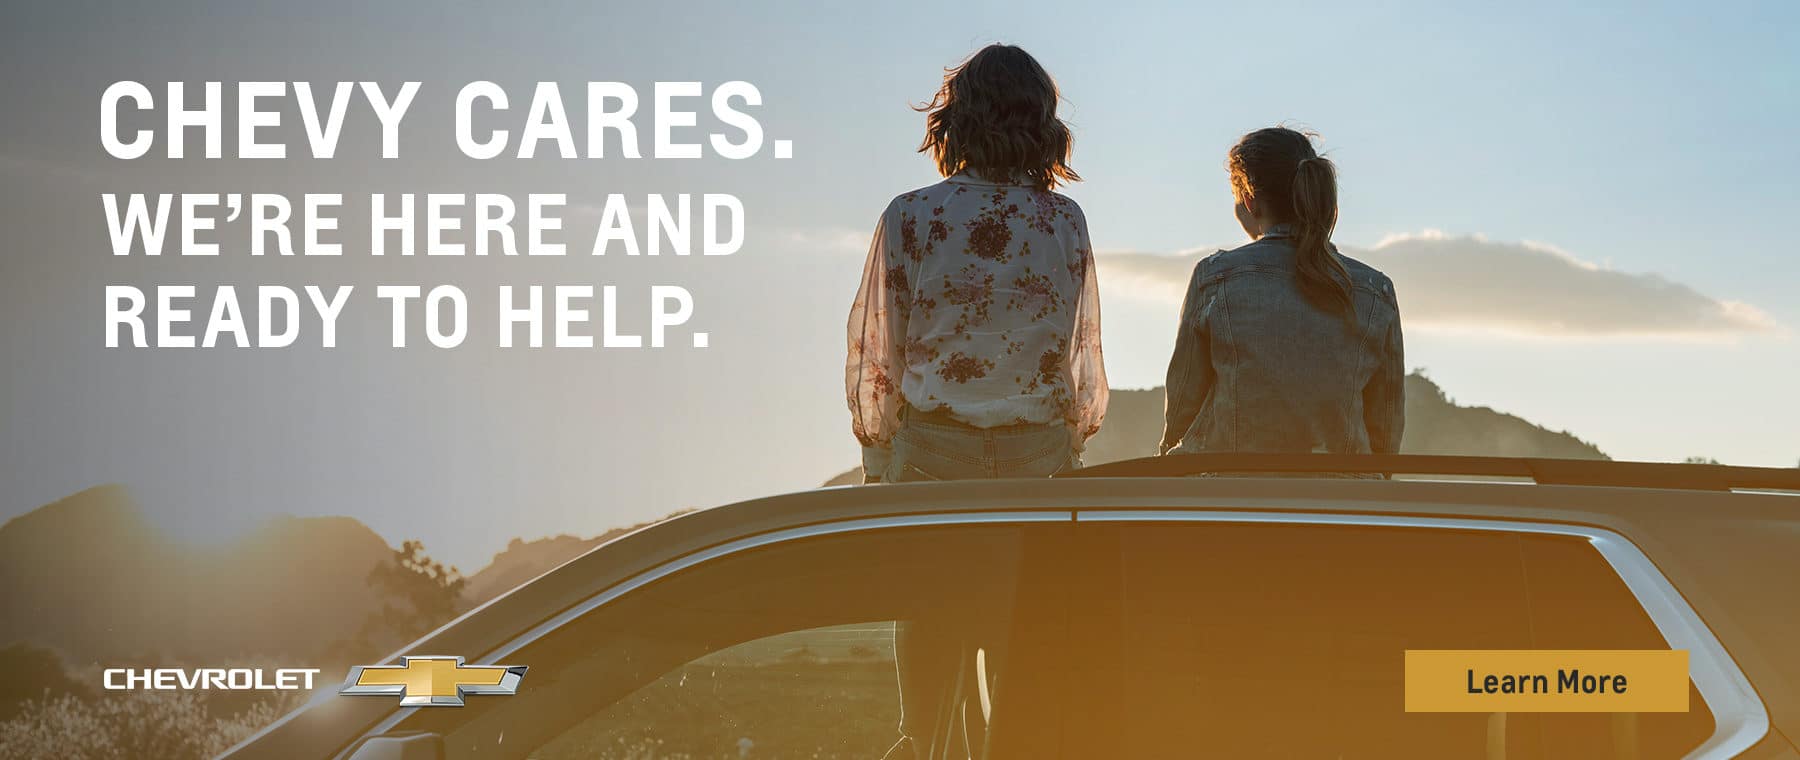 Chevy Cares Banner